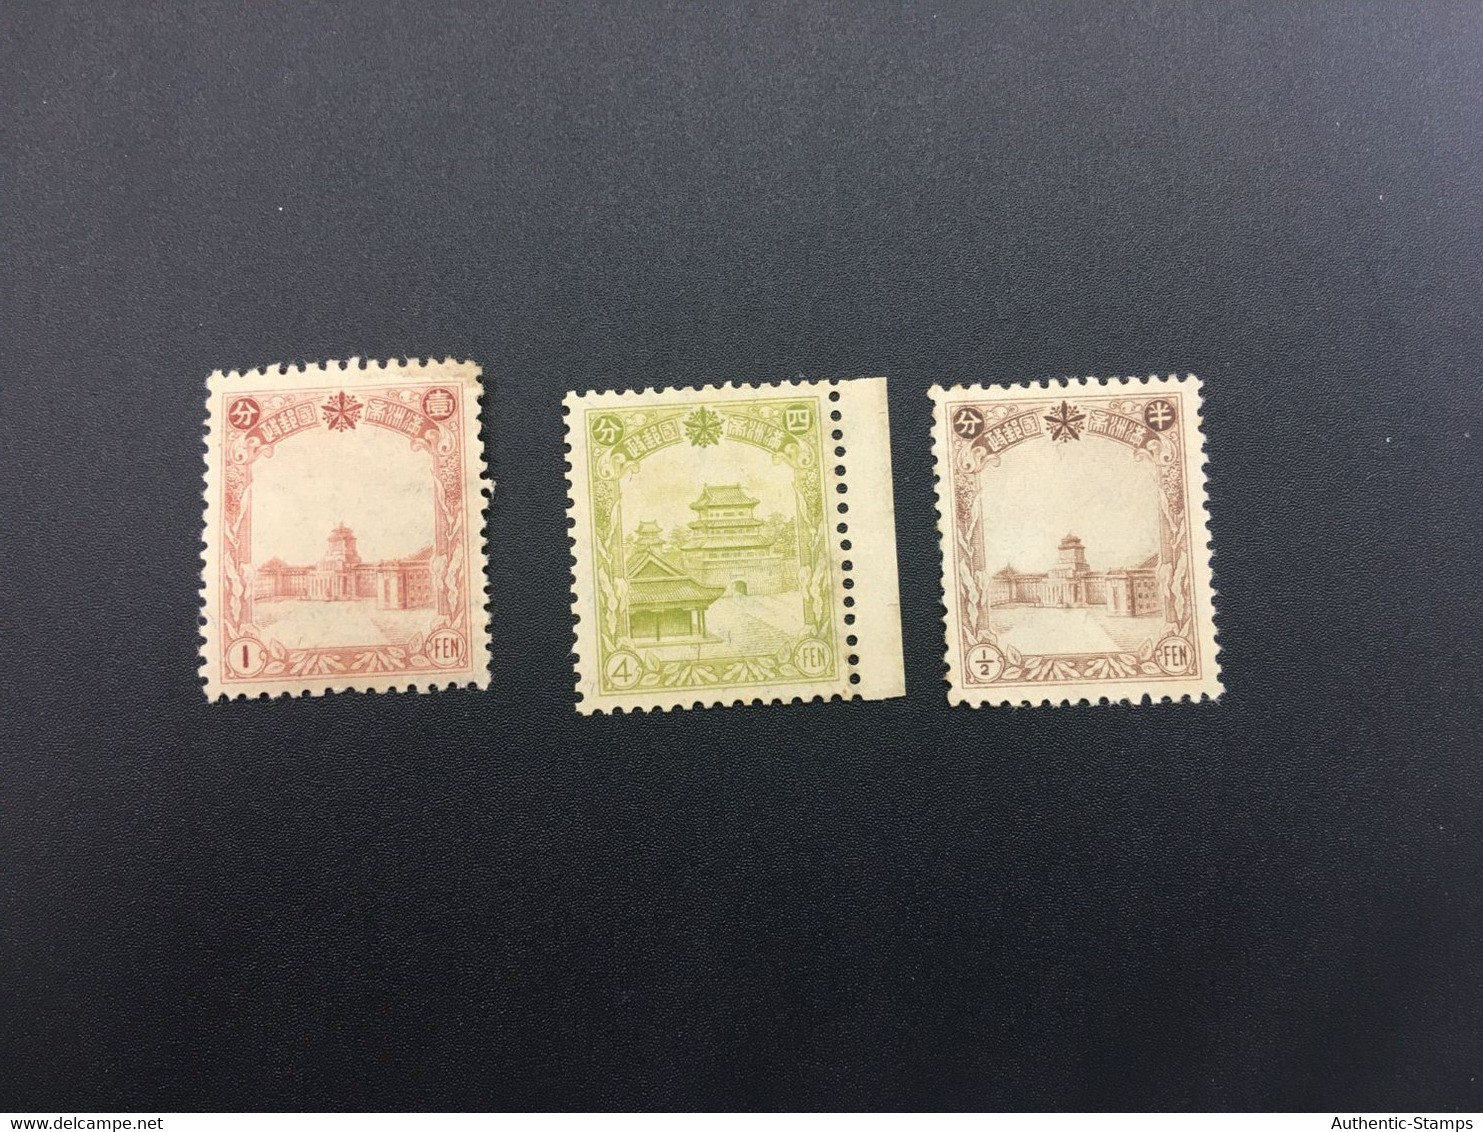 CHINA STAMP,  TIMBRO, STEMPEL,  CINA, CHINE, LIST 8277 - 1932-45 Mandchourie (Mandchoukouo)